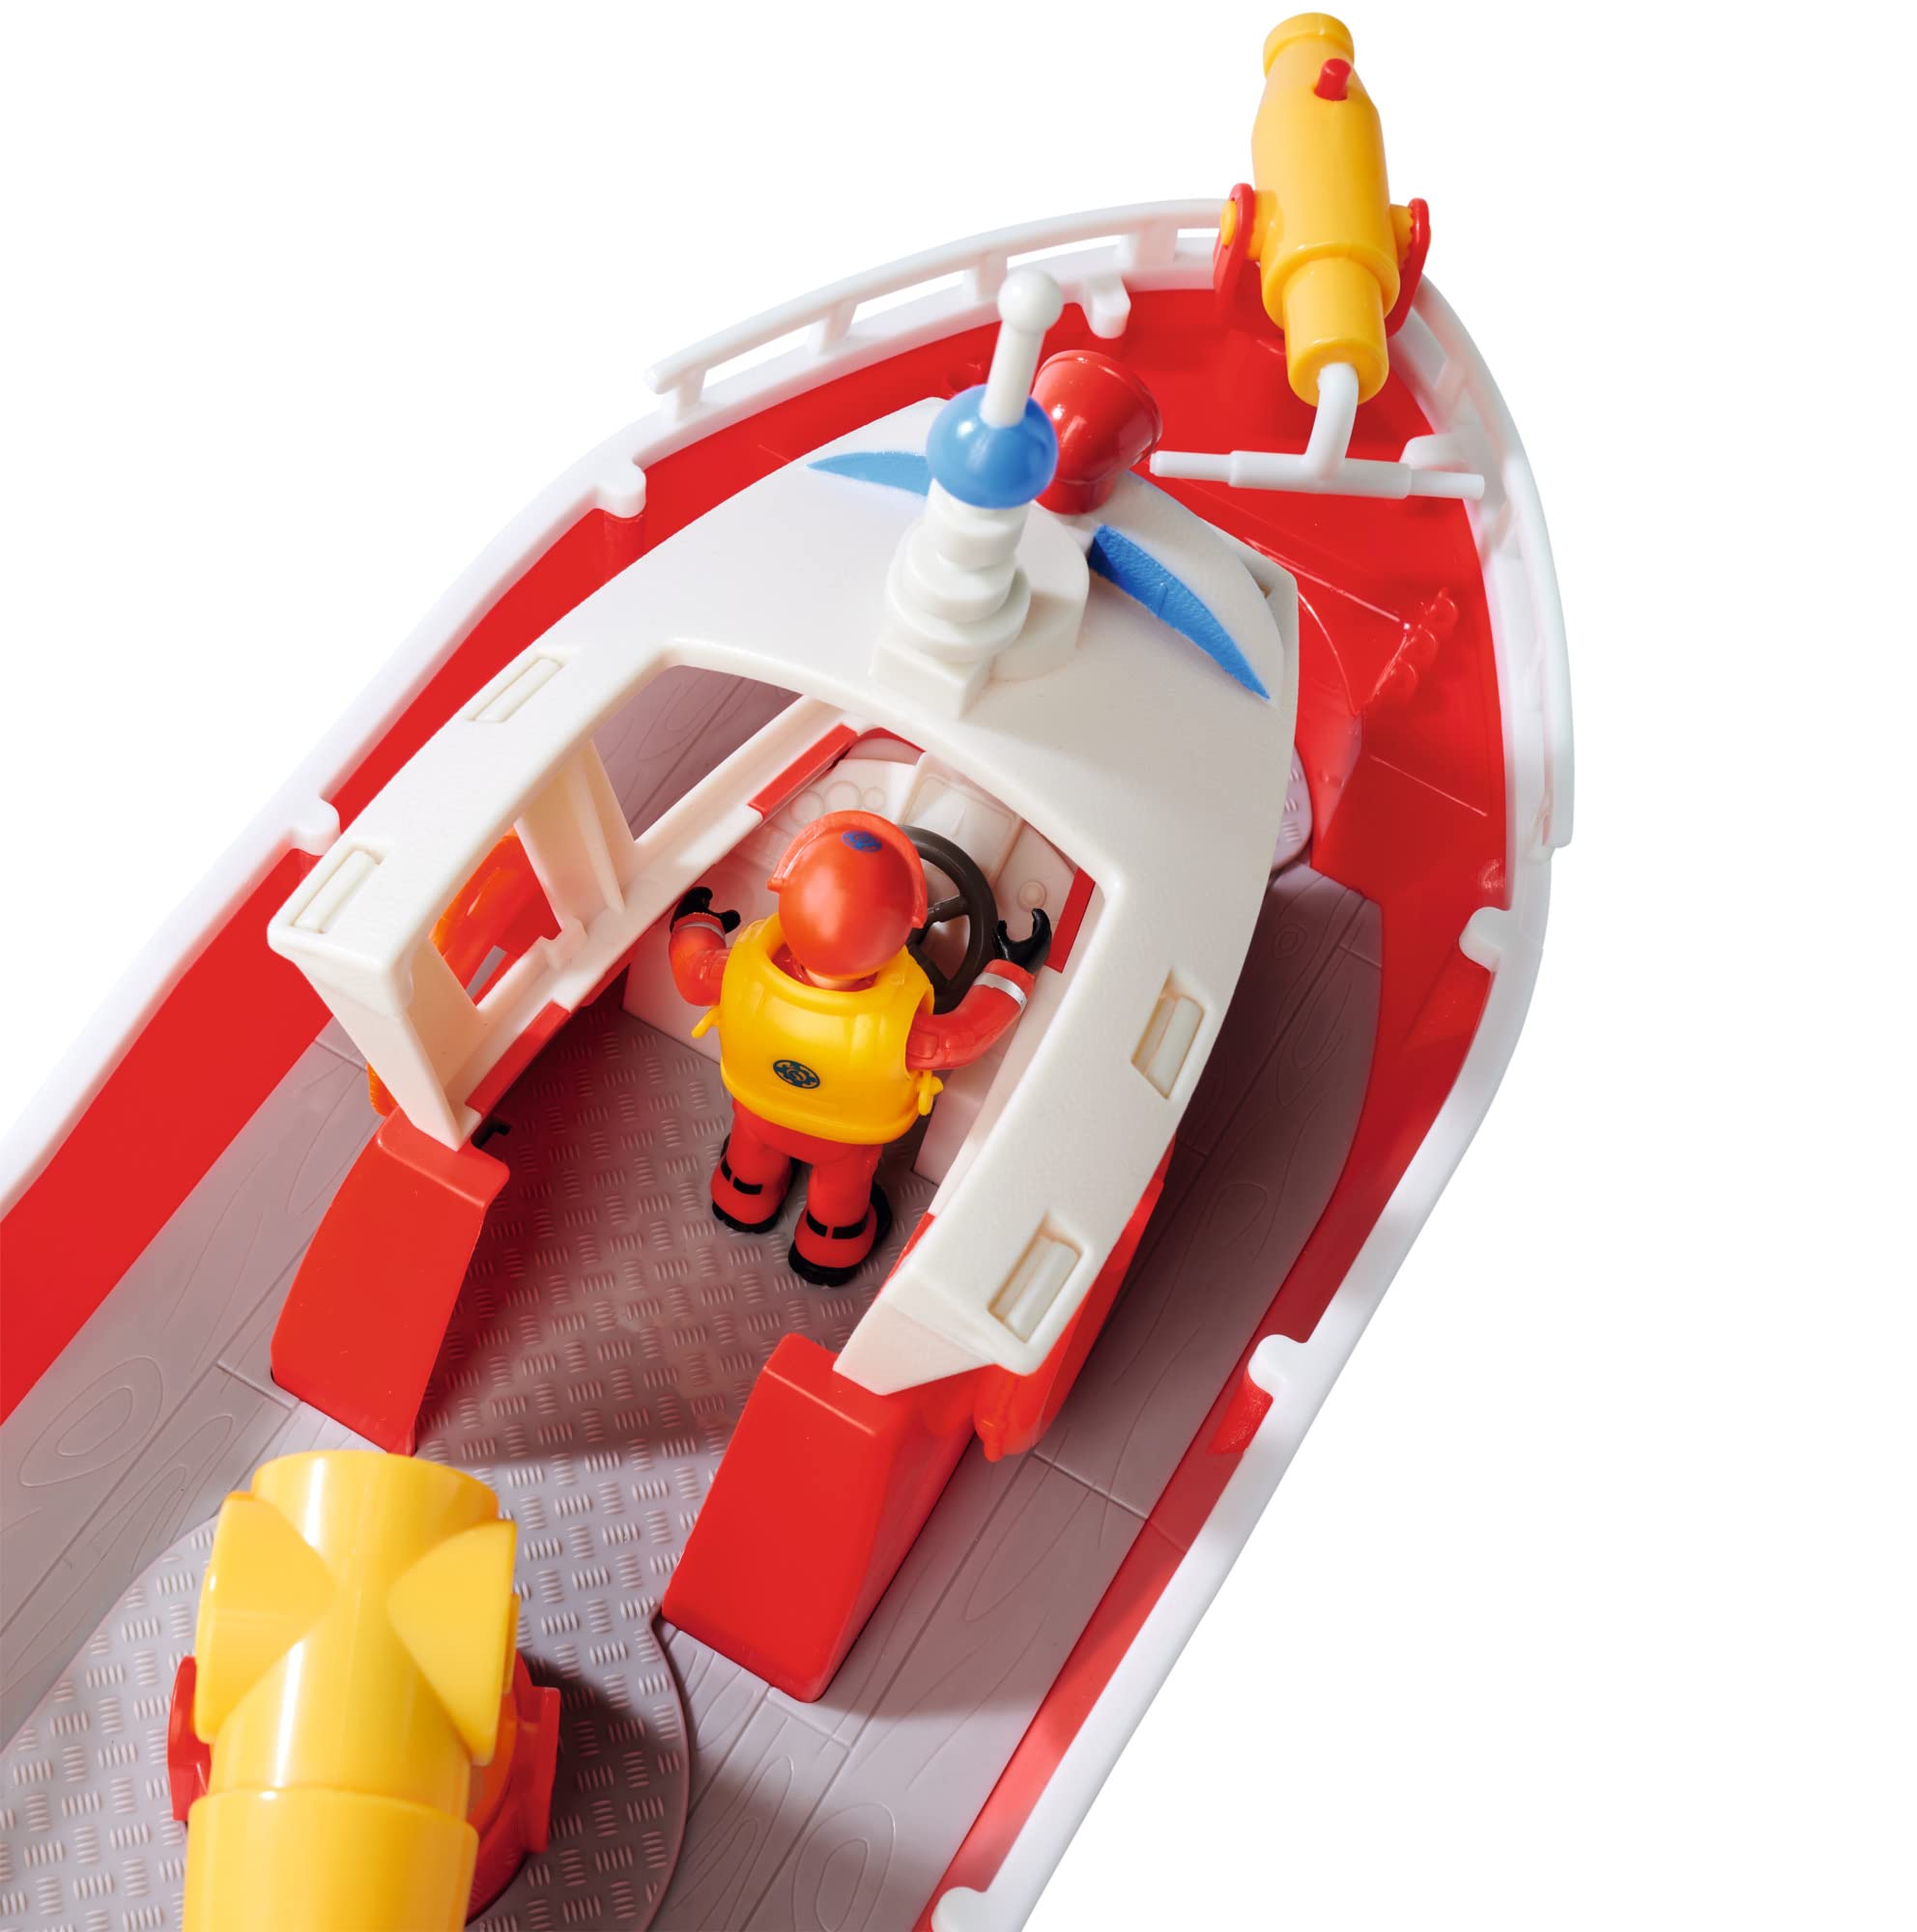 Simba 109252580 - Firefighter Sam Fire Boat Titan 32 cm Floating Toy Boat, from 3 Years, You can Play with it Both on Land and in Water, Bath Toy with Firefighter Figure, Red